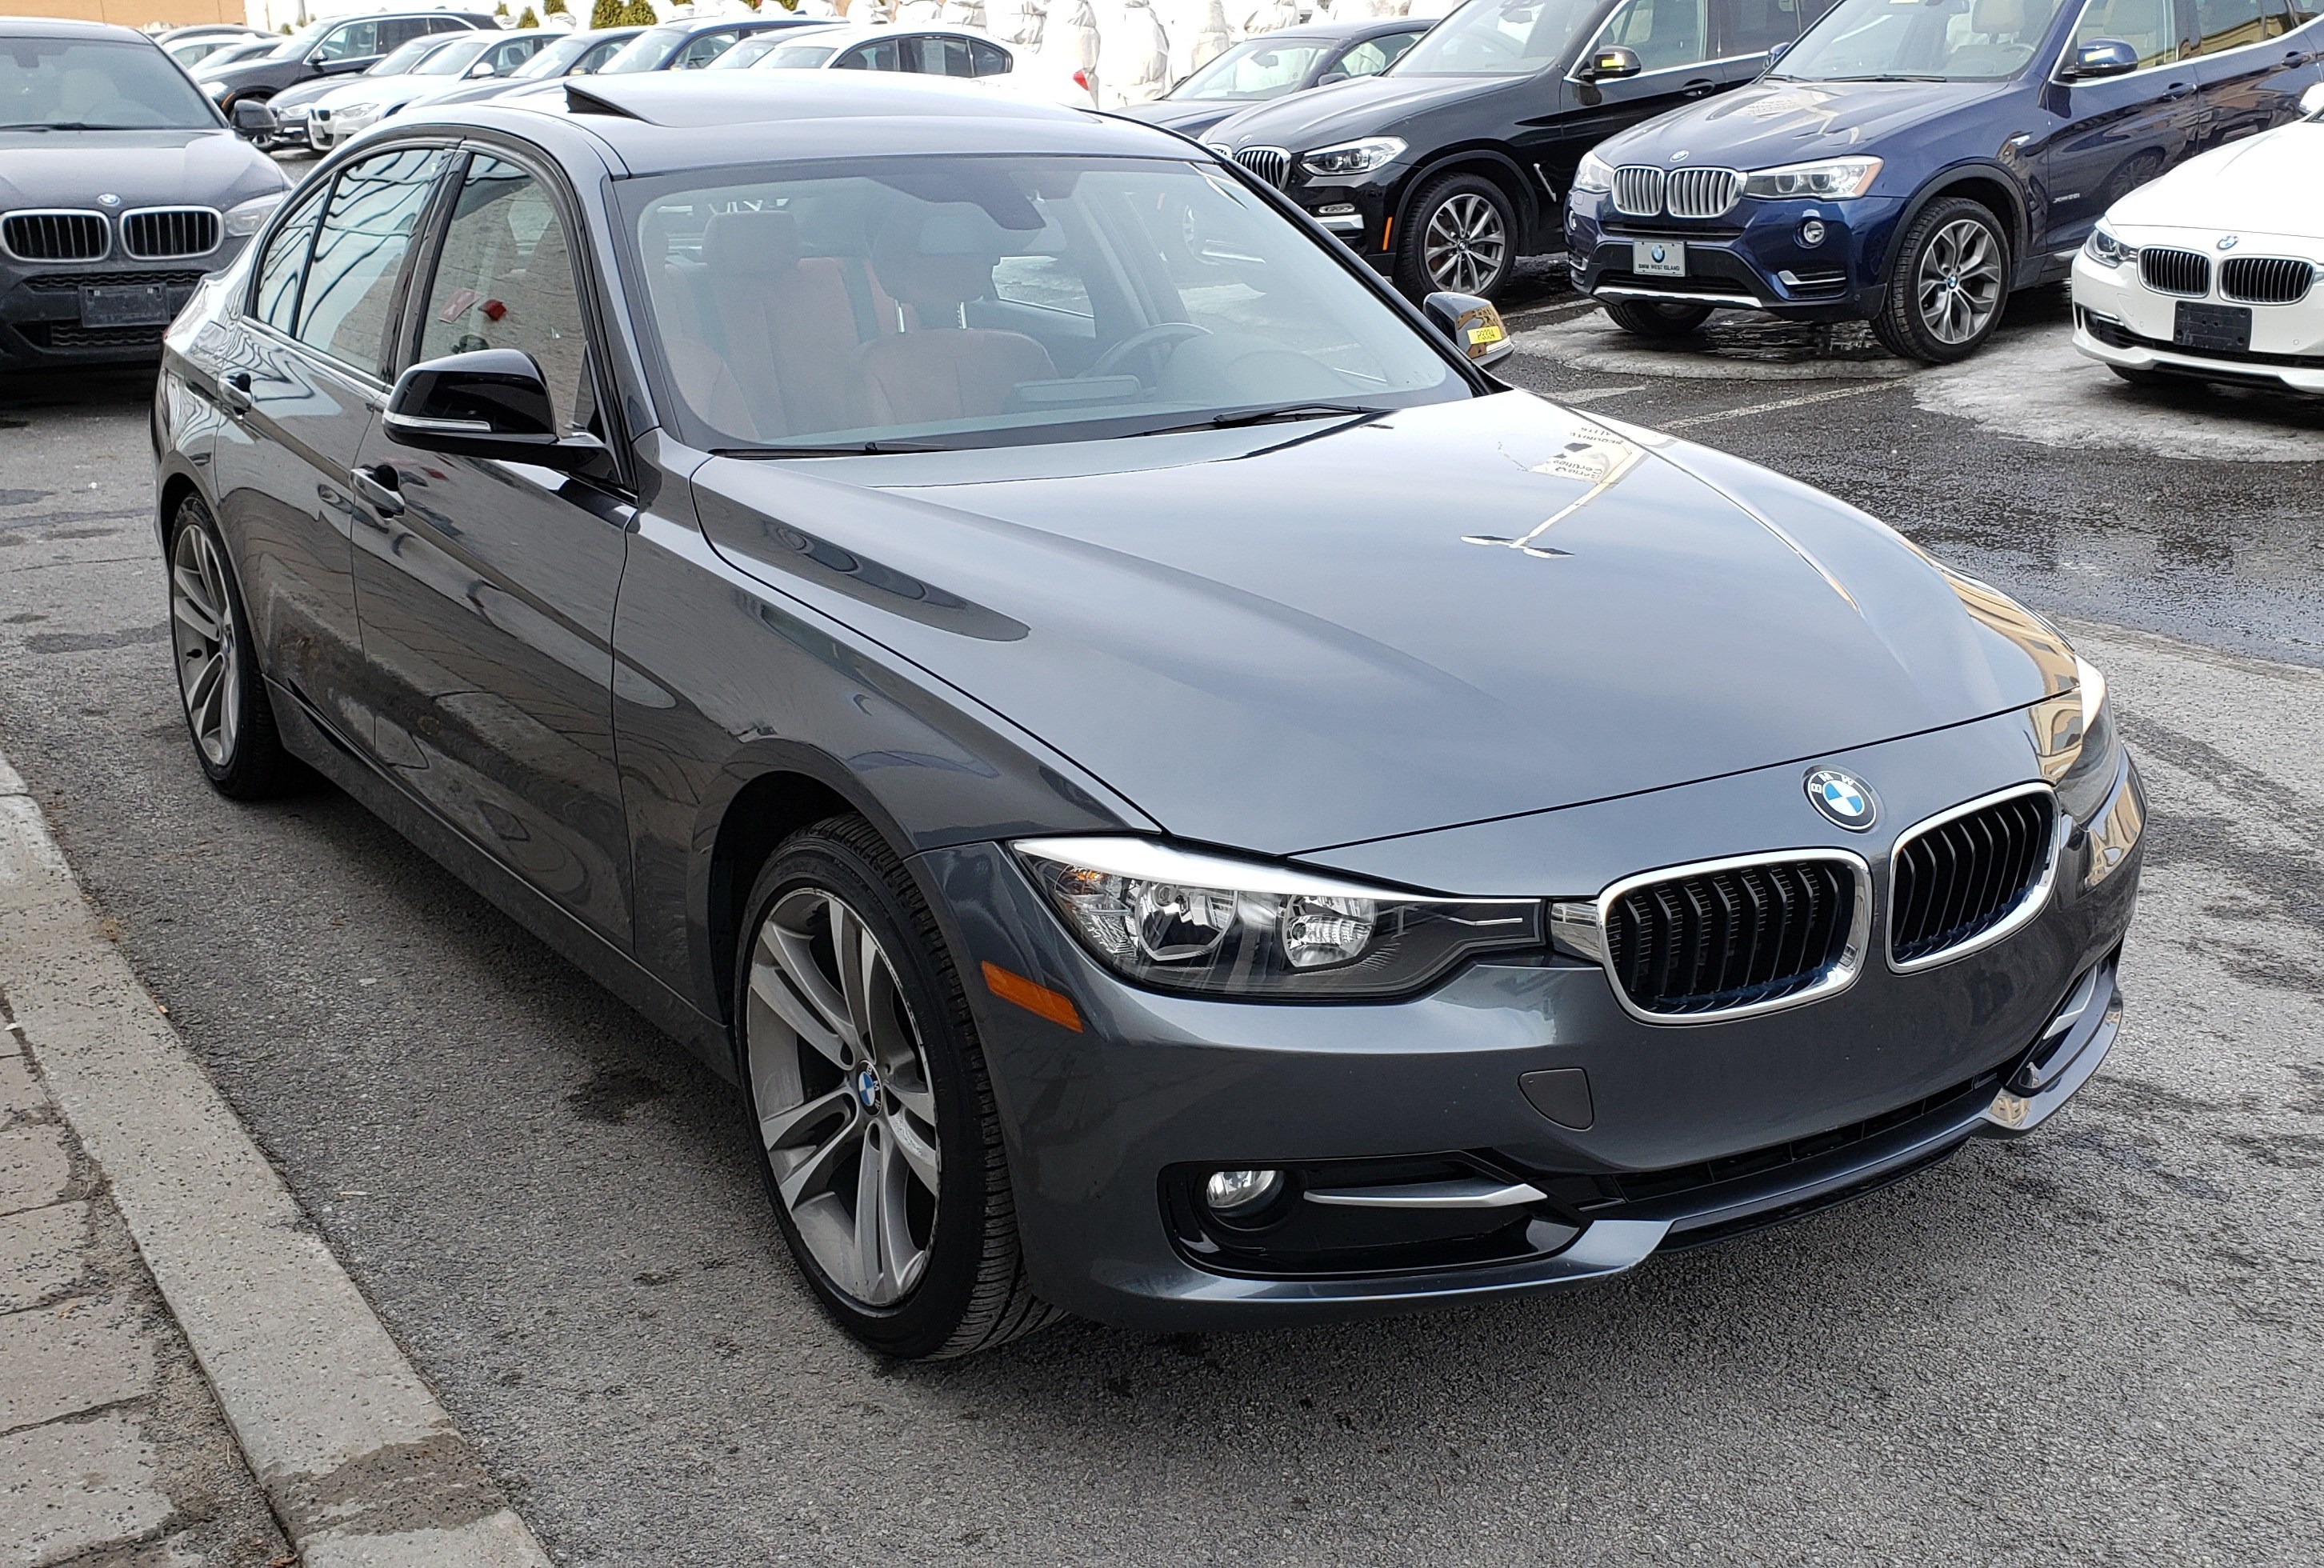  BMW 320 XDRIVE THIS PRICE IS